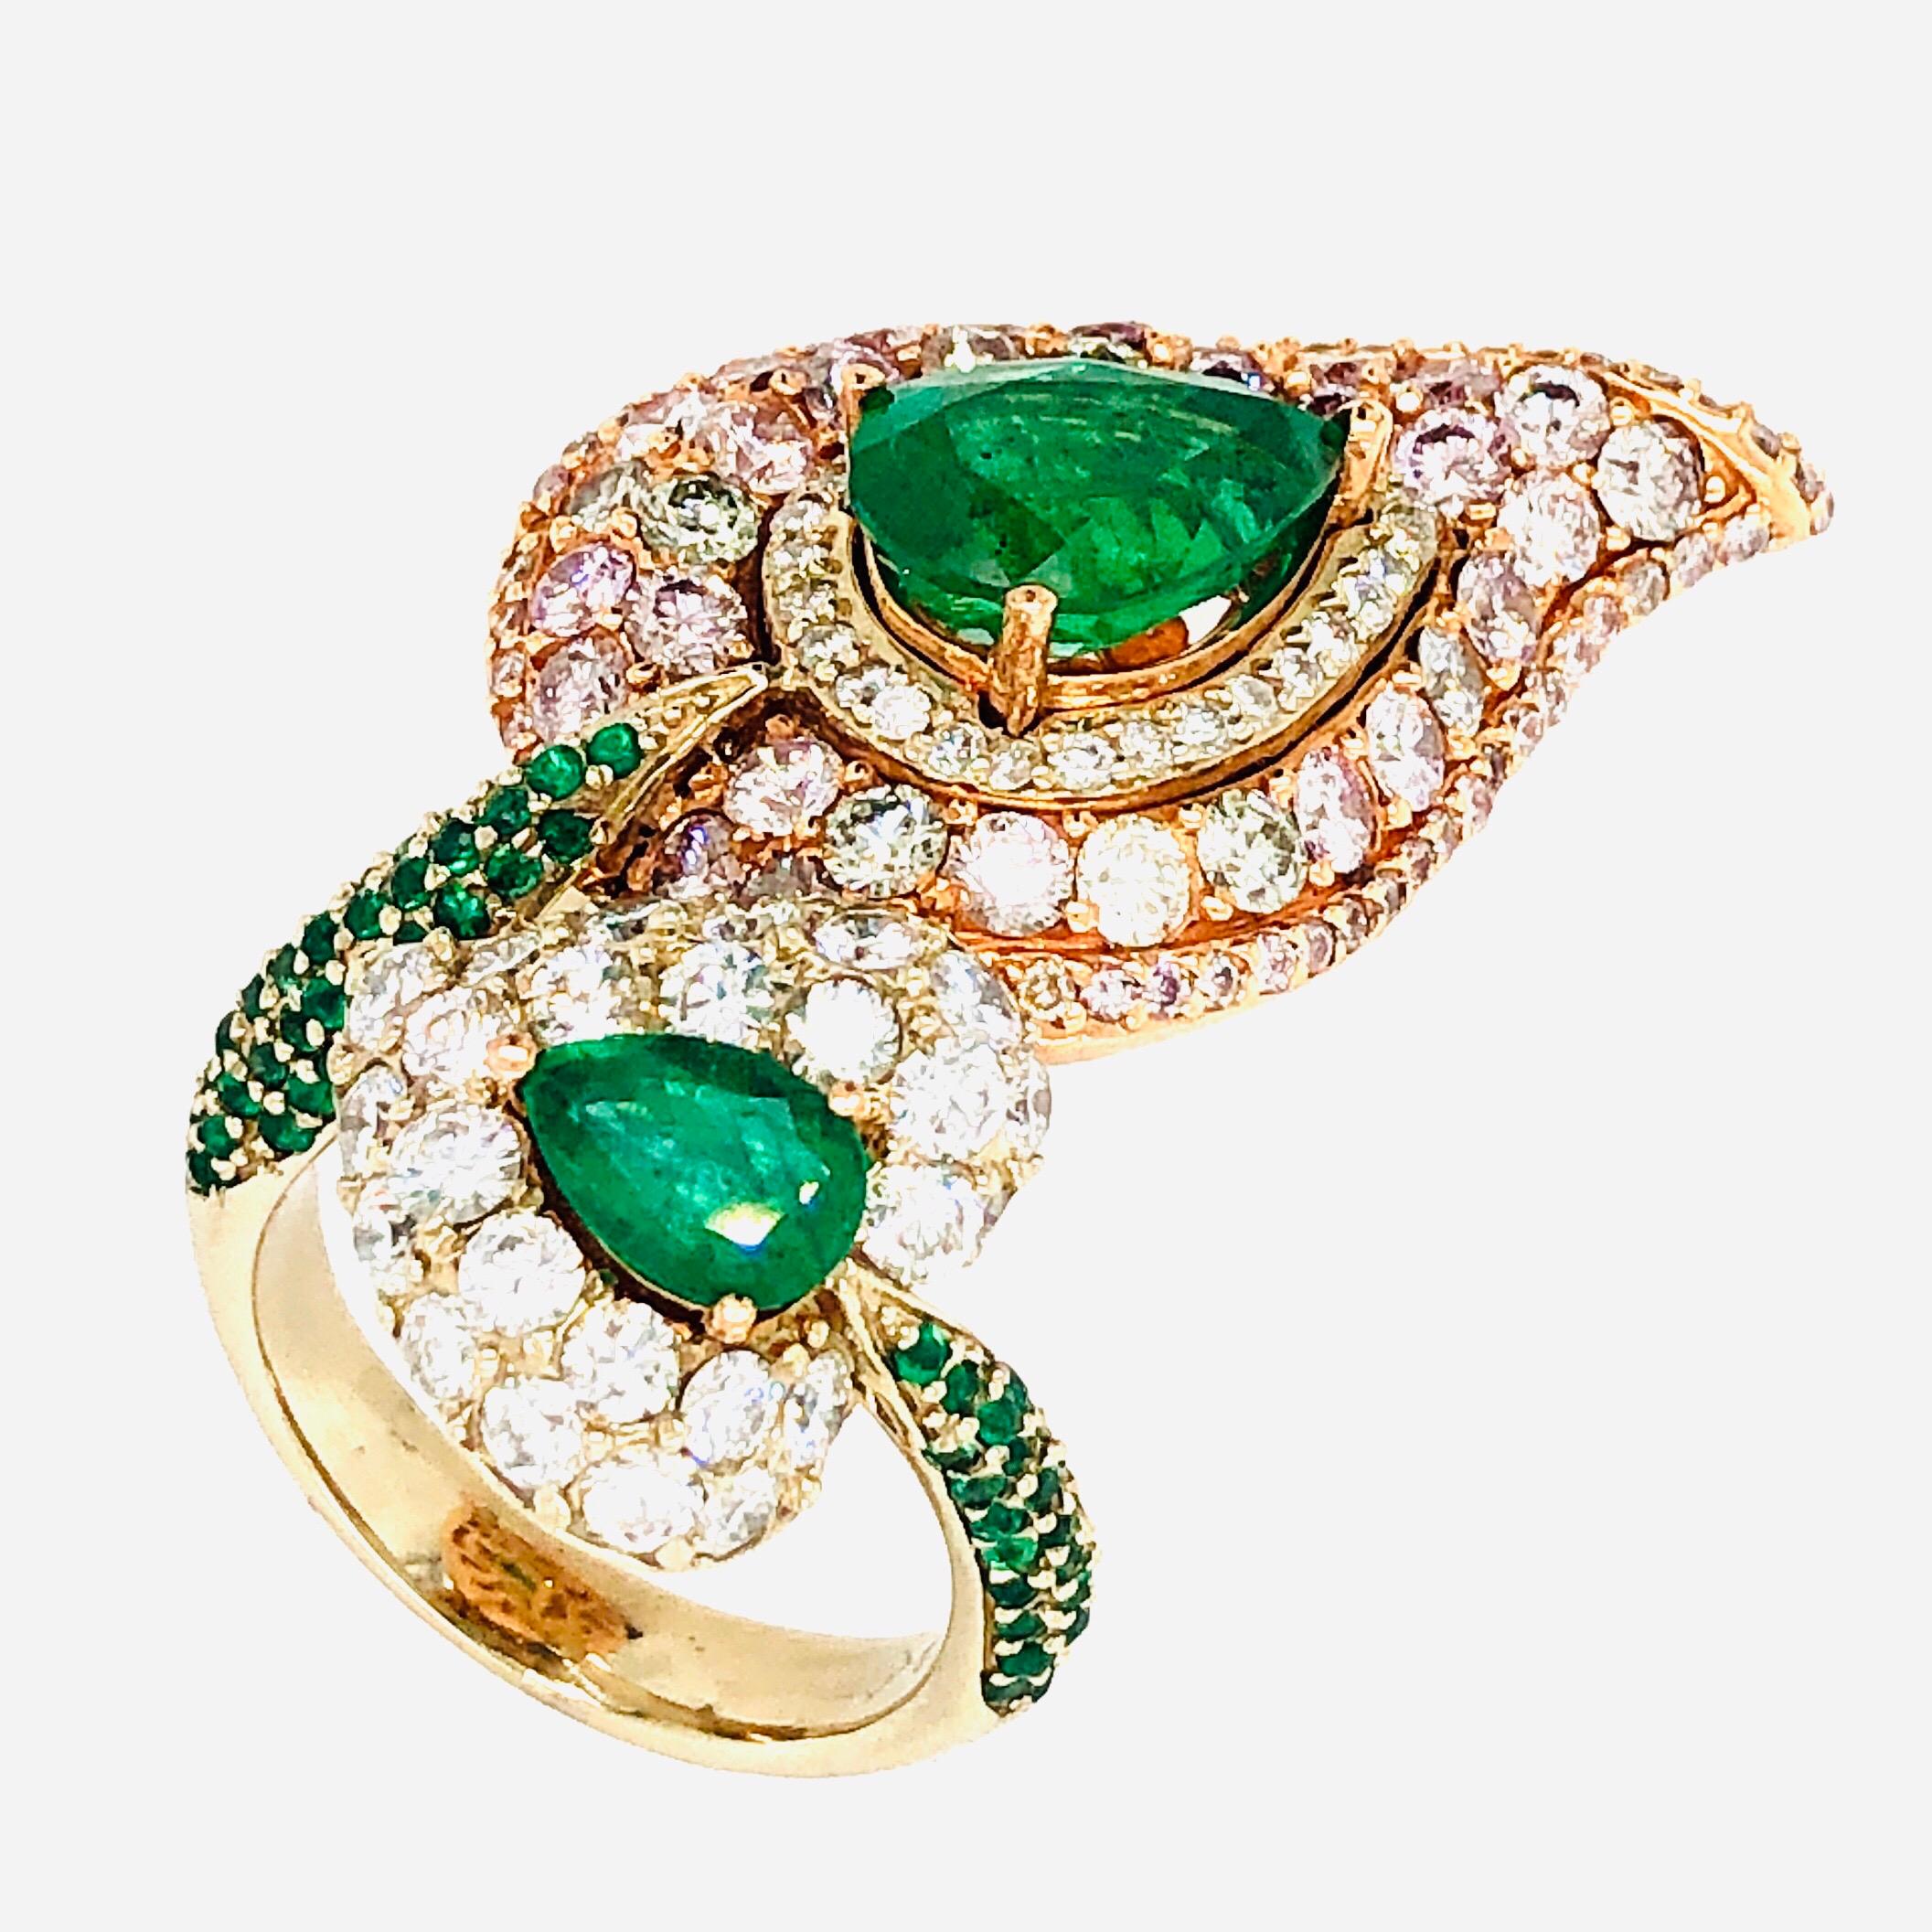 Offered here is gorgeous leaf ring with natural pink diamonds, white diamonds, green diamonds and natural emeralds all set in 18kt rose and white gold. The ring has two ( 2 ) emerald pear shape, the big one weighs about 2.25 carat and the smaller